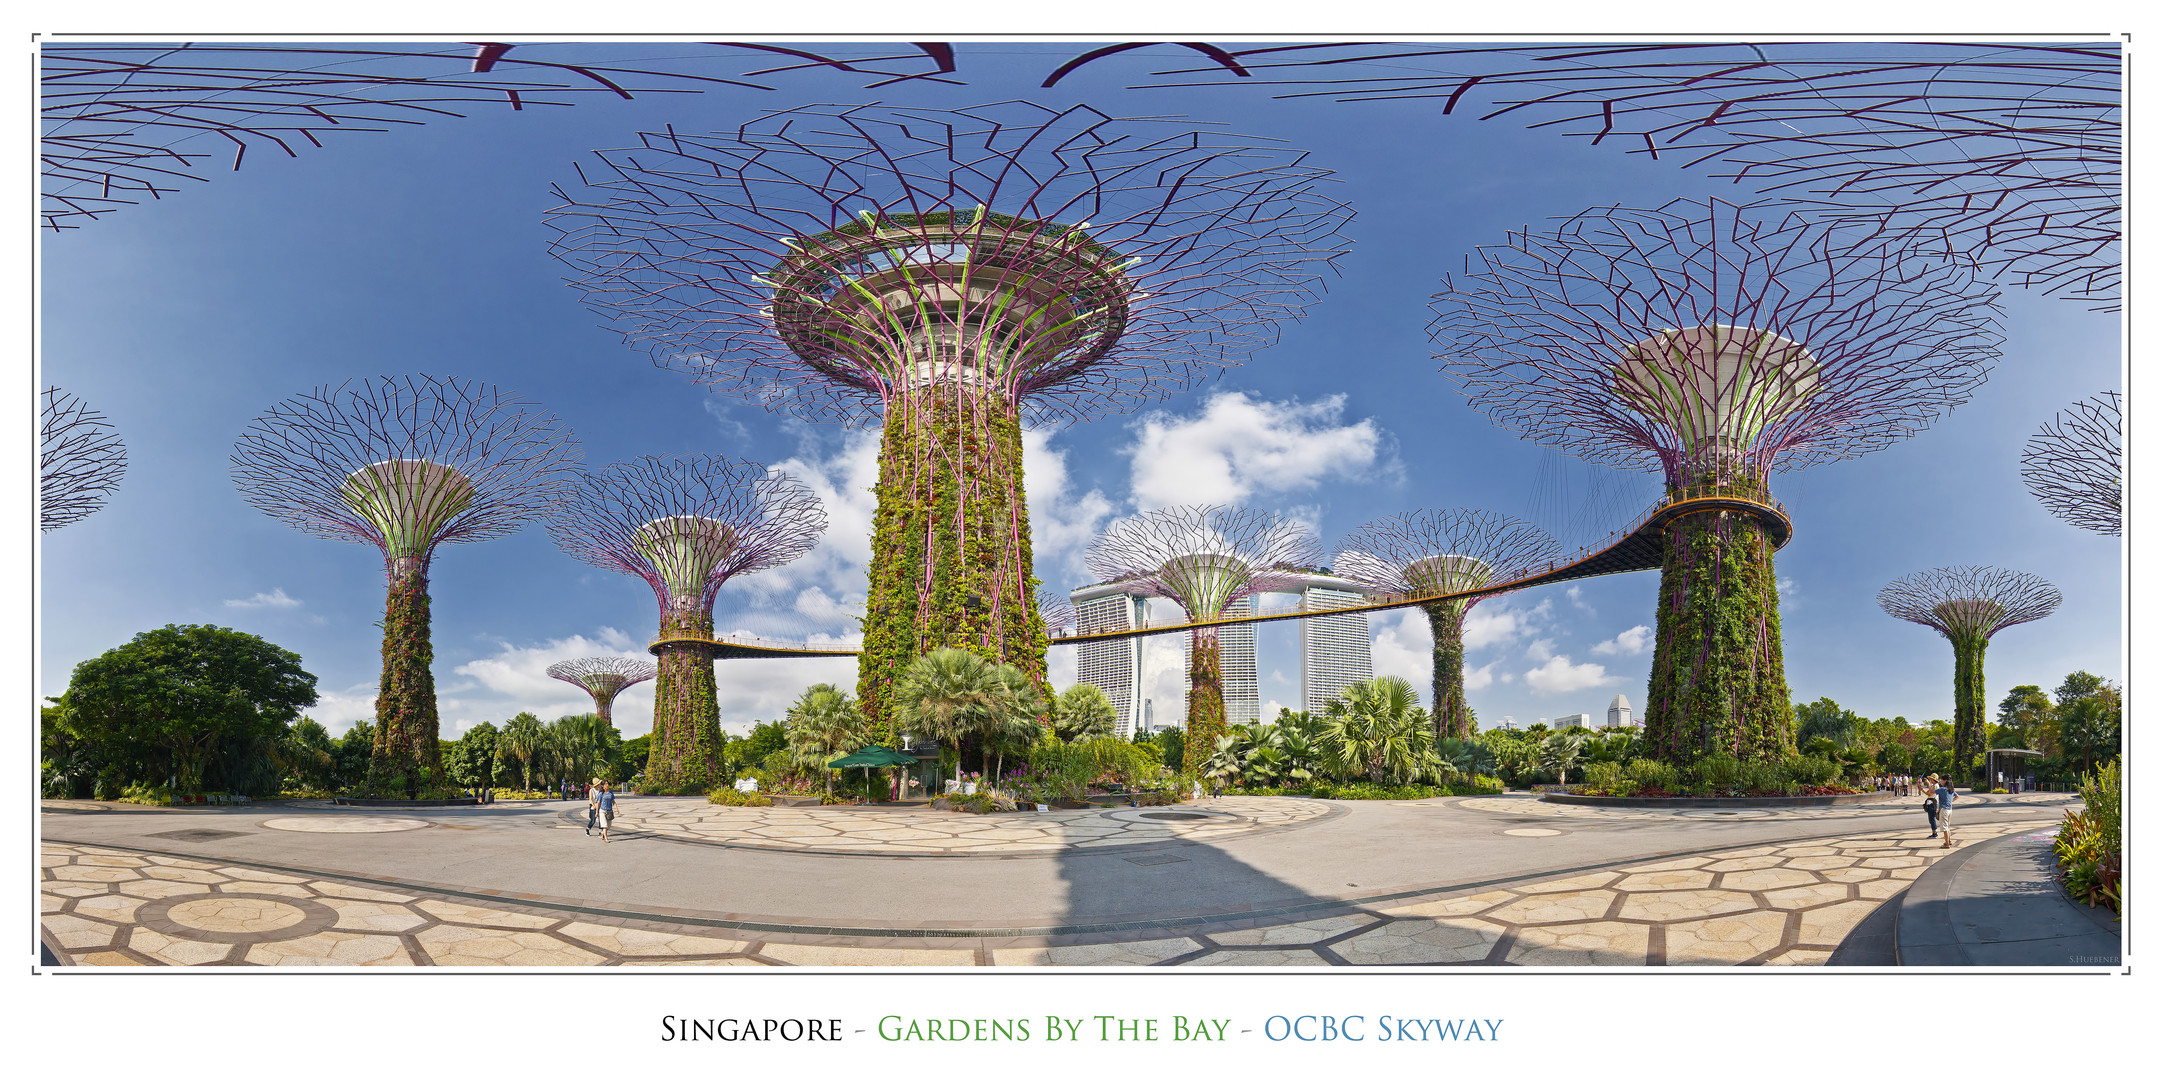 Singapore "Gardens By The Bay"